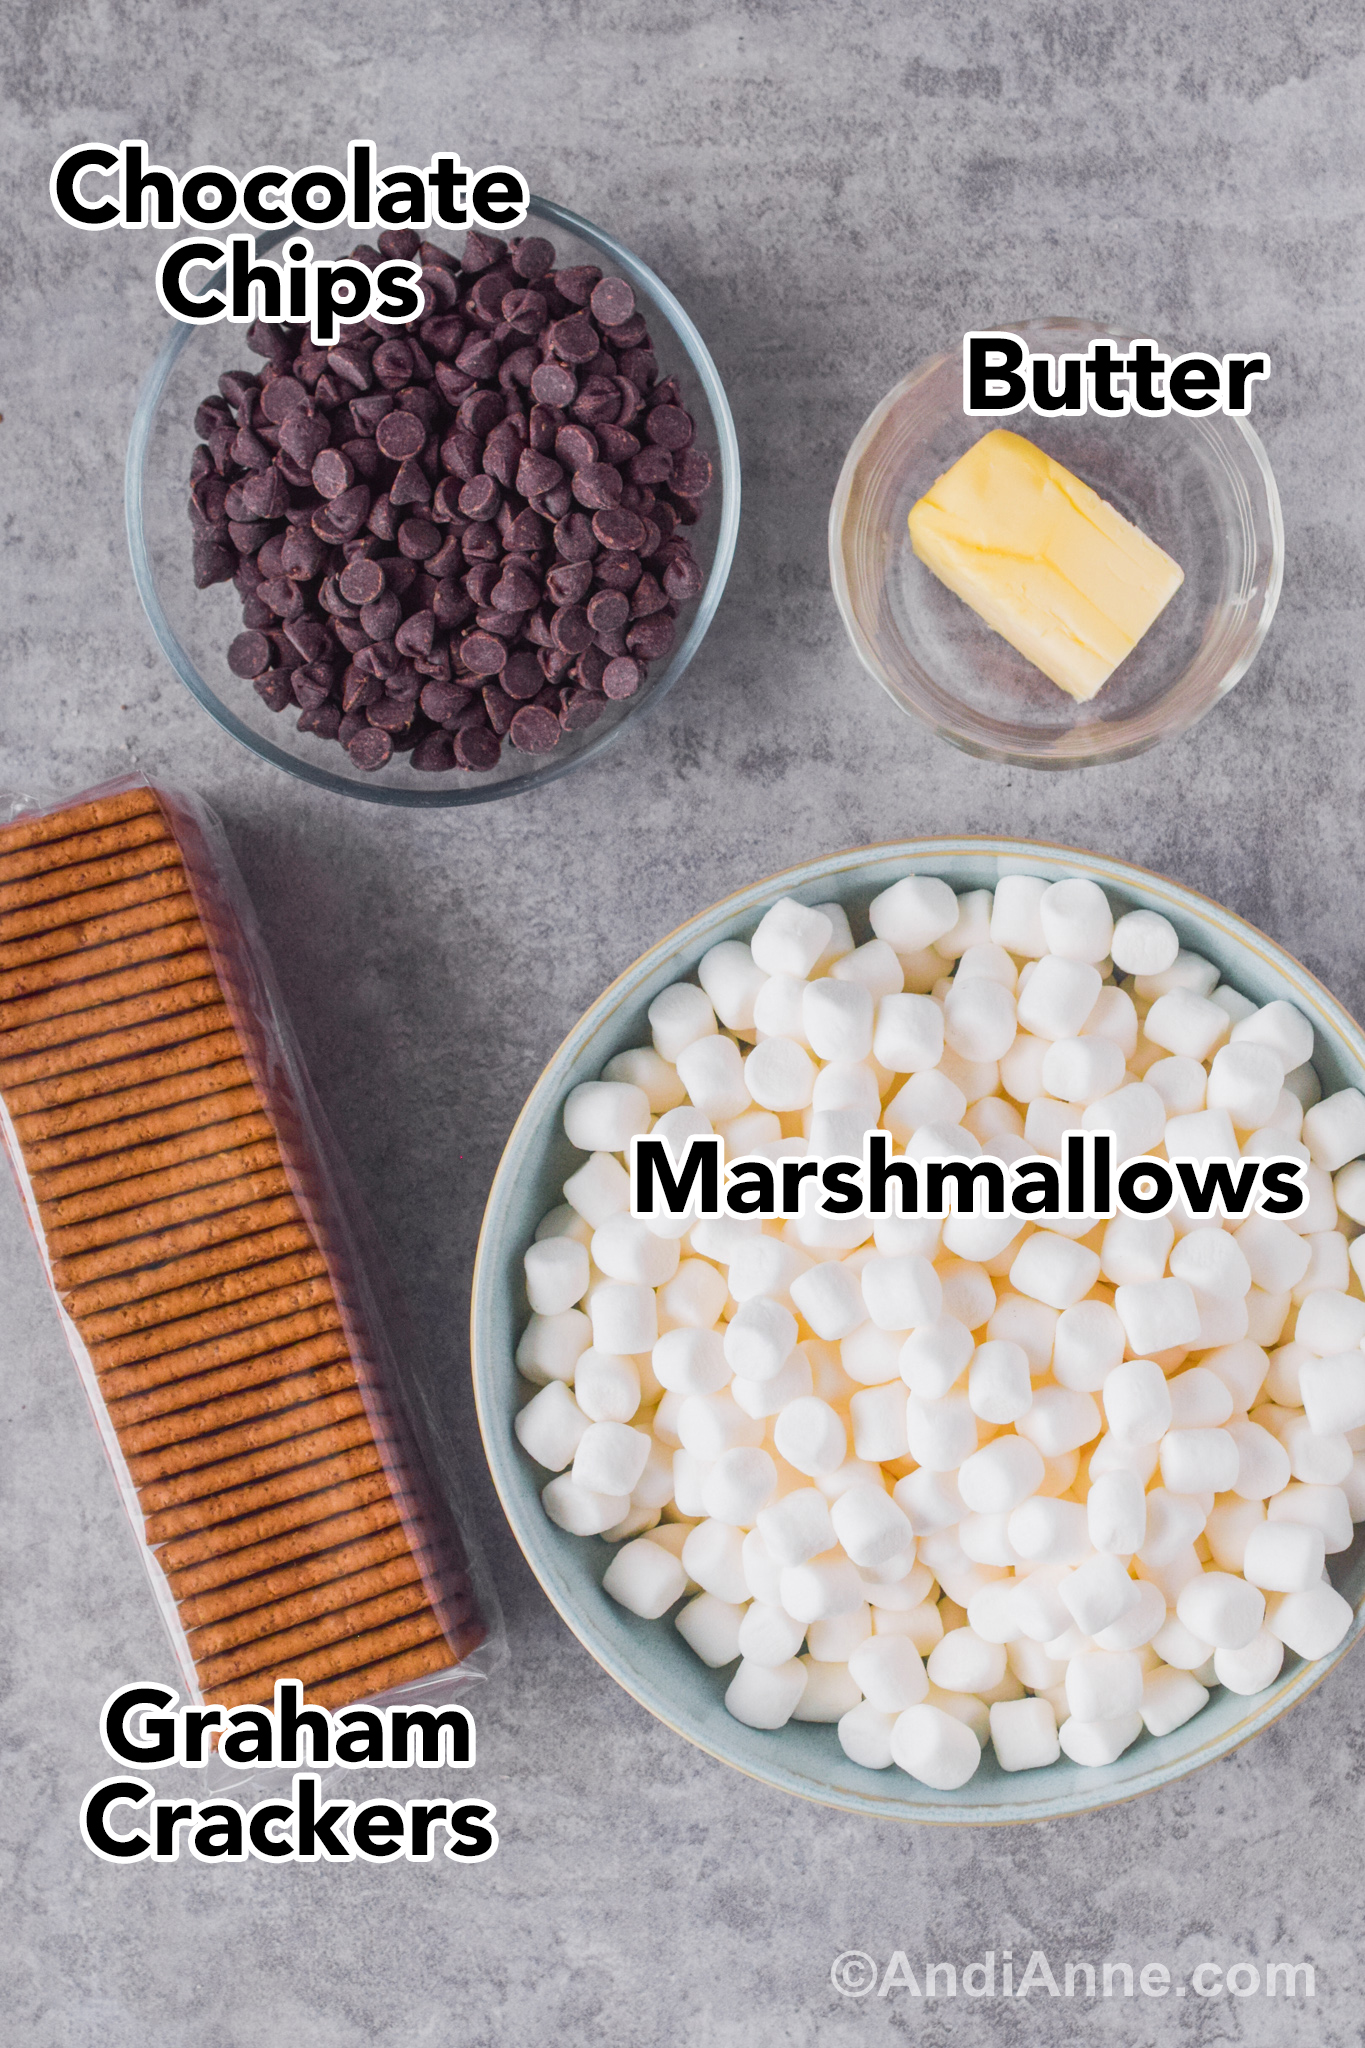 Bowl of chocolate chips, bowl of mini marshmallows, bowl of butter and sleeve of graham crackers on a counter.